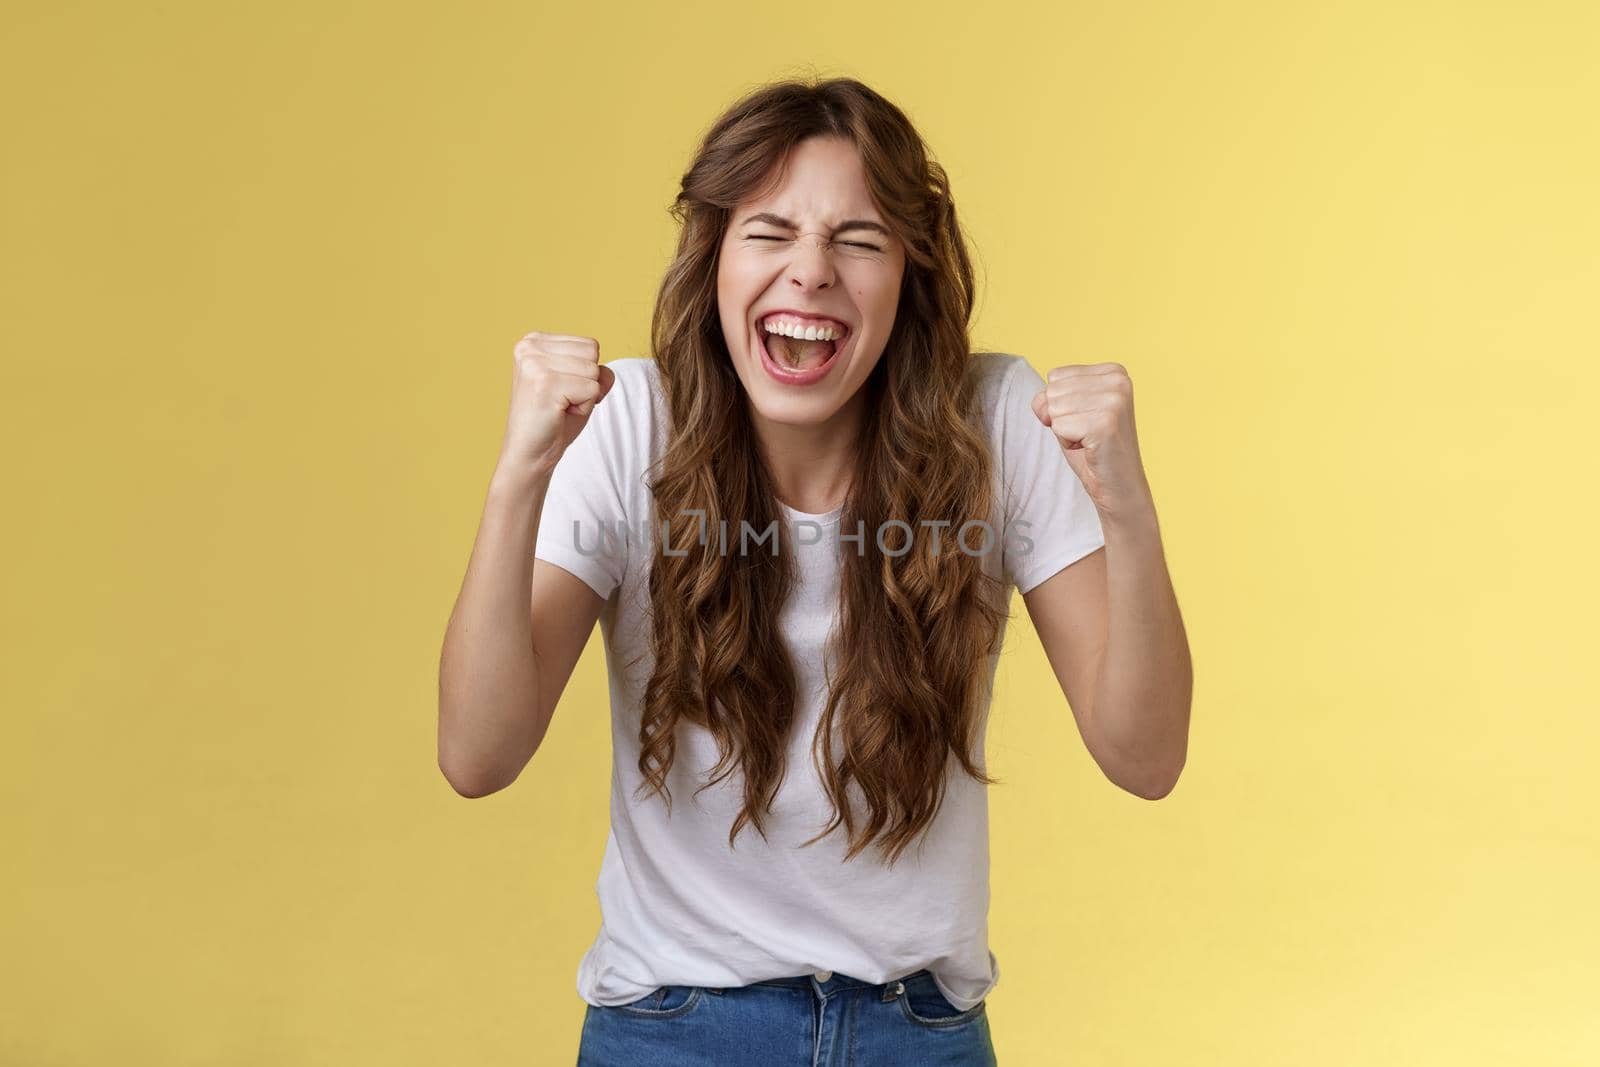 Cheerful excited happy enthusiastic girl yelling rooting wanna win badly fist pump celebratory satisfied awesome success winning triumphing joyfully close eyes shaking clench arms yellow background. Lifestyle.